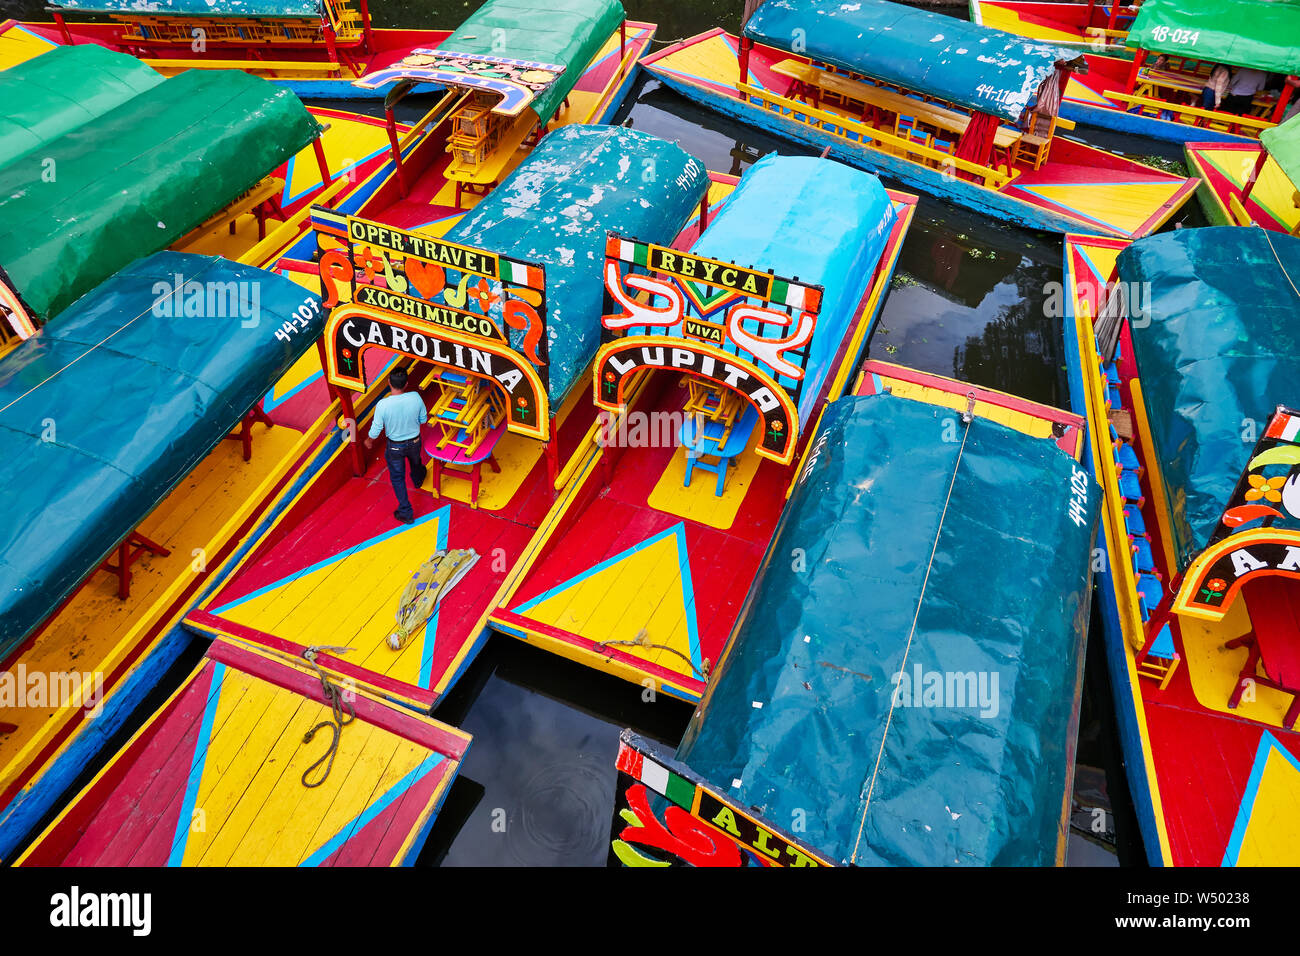 Xochimilco, Mexico City, June 25, 2019 - Trajineras moored in Nativitas Embarcadero with one man on the boat. Group of boats in Xochimilco canal. Stock Photo